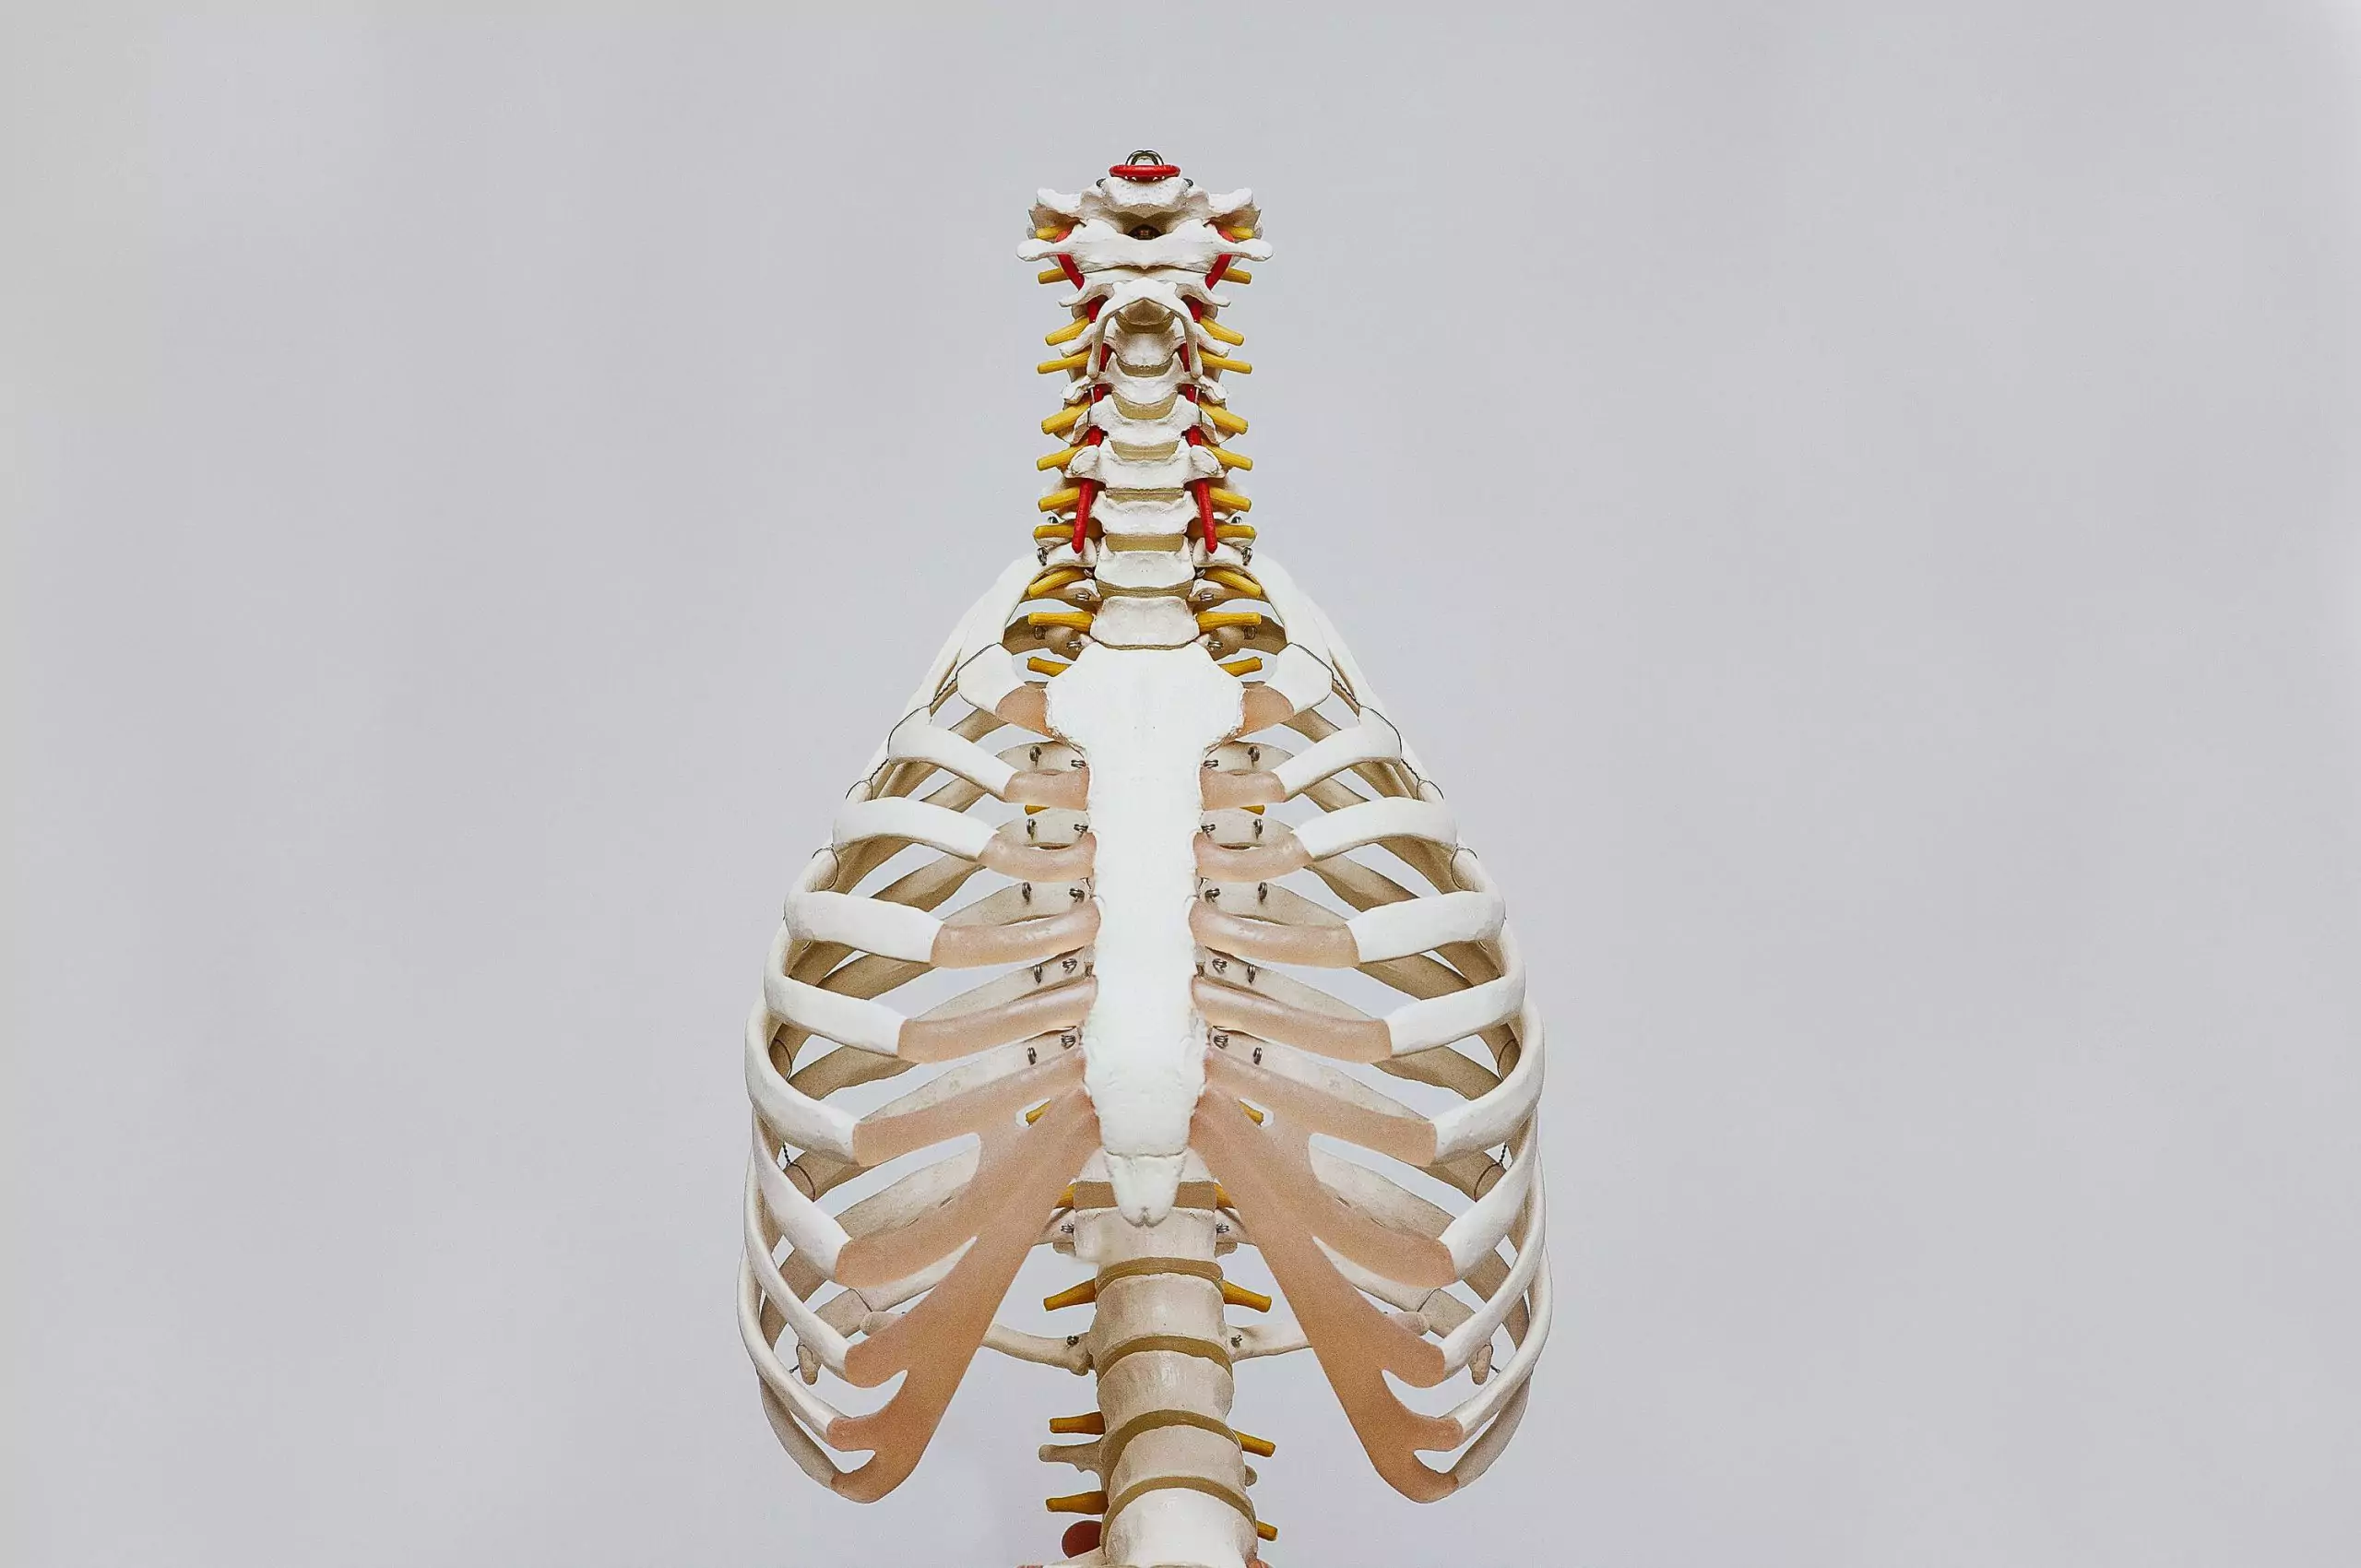 A skeleton of the upper body shows lungs